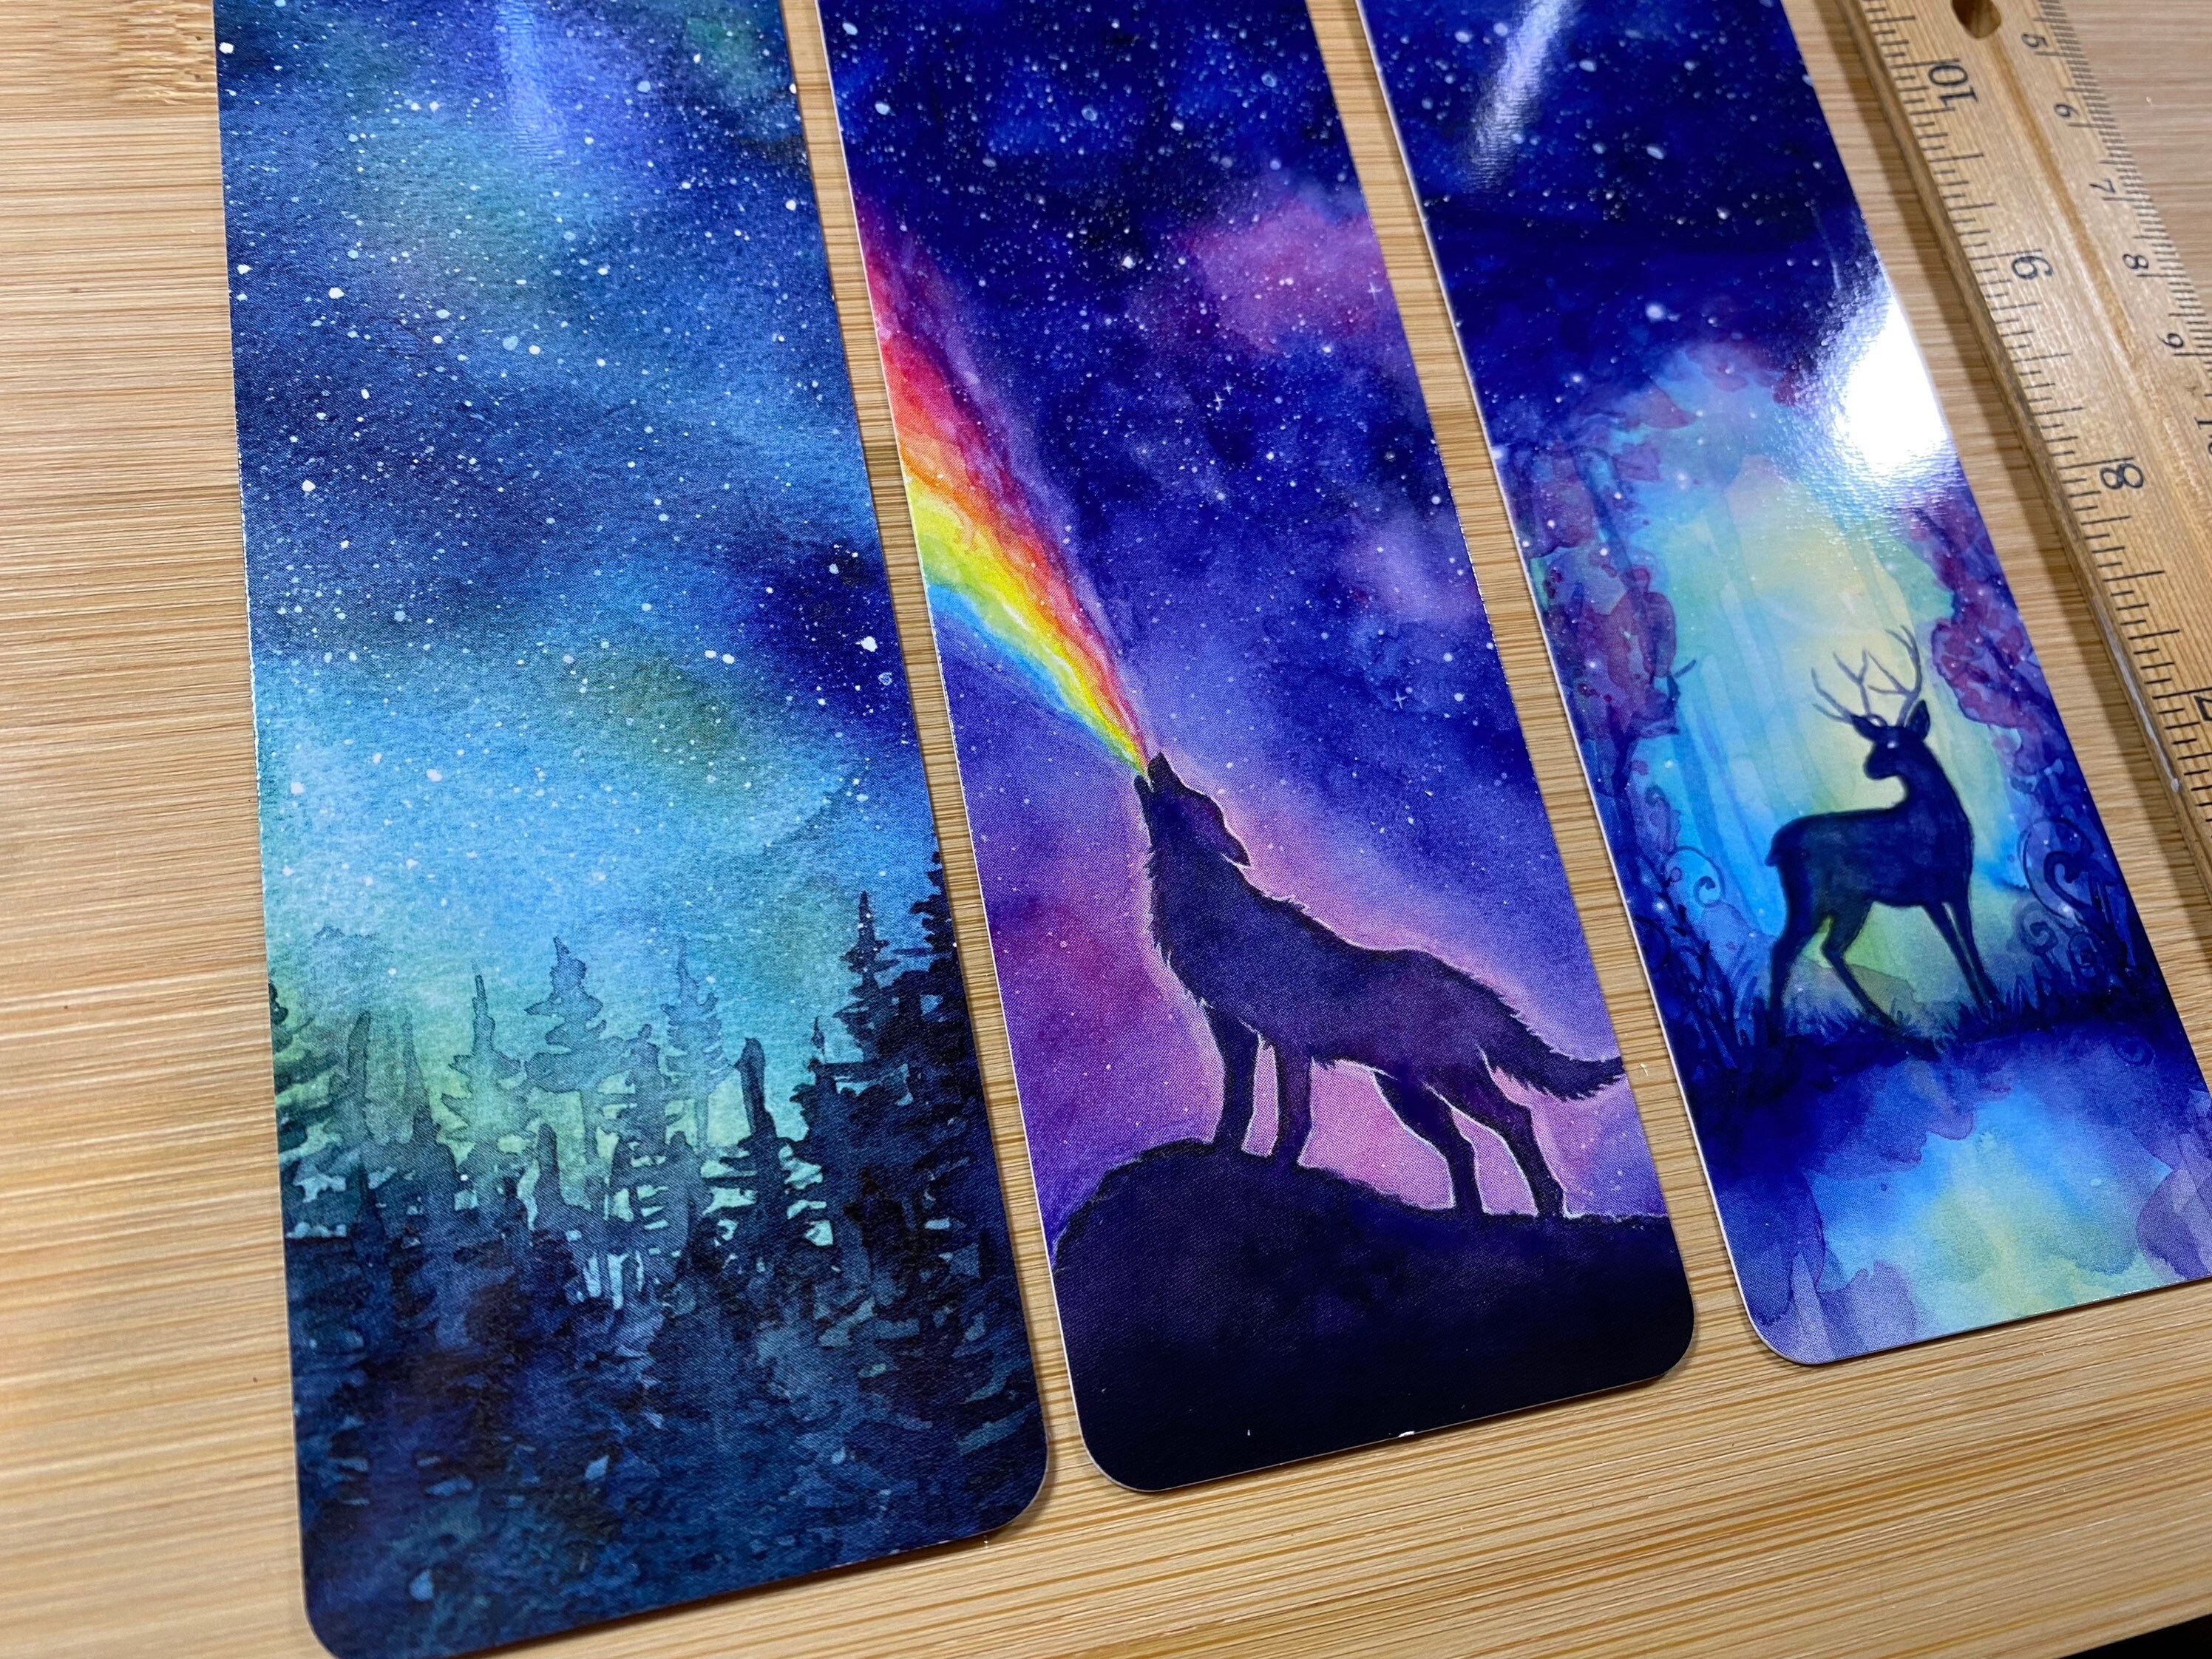 Galaxy Watercolor Postcards Set of 5, Northern Lights Aurora Borealis  Forest Cards, Galaxy Art, Watercolor Galaxy Postcards, Galaxy Painting 